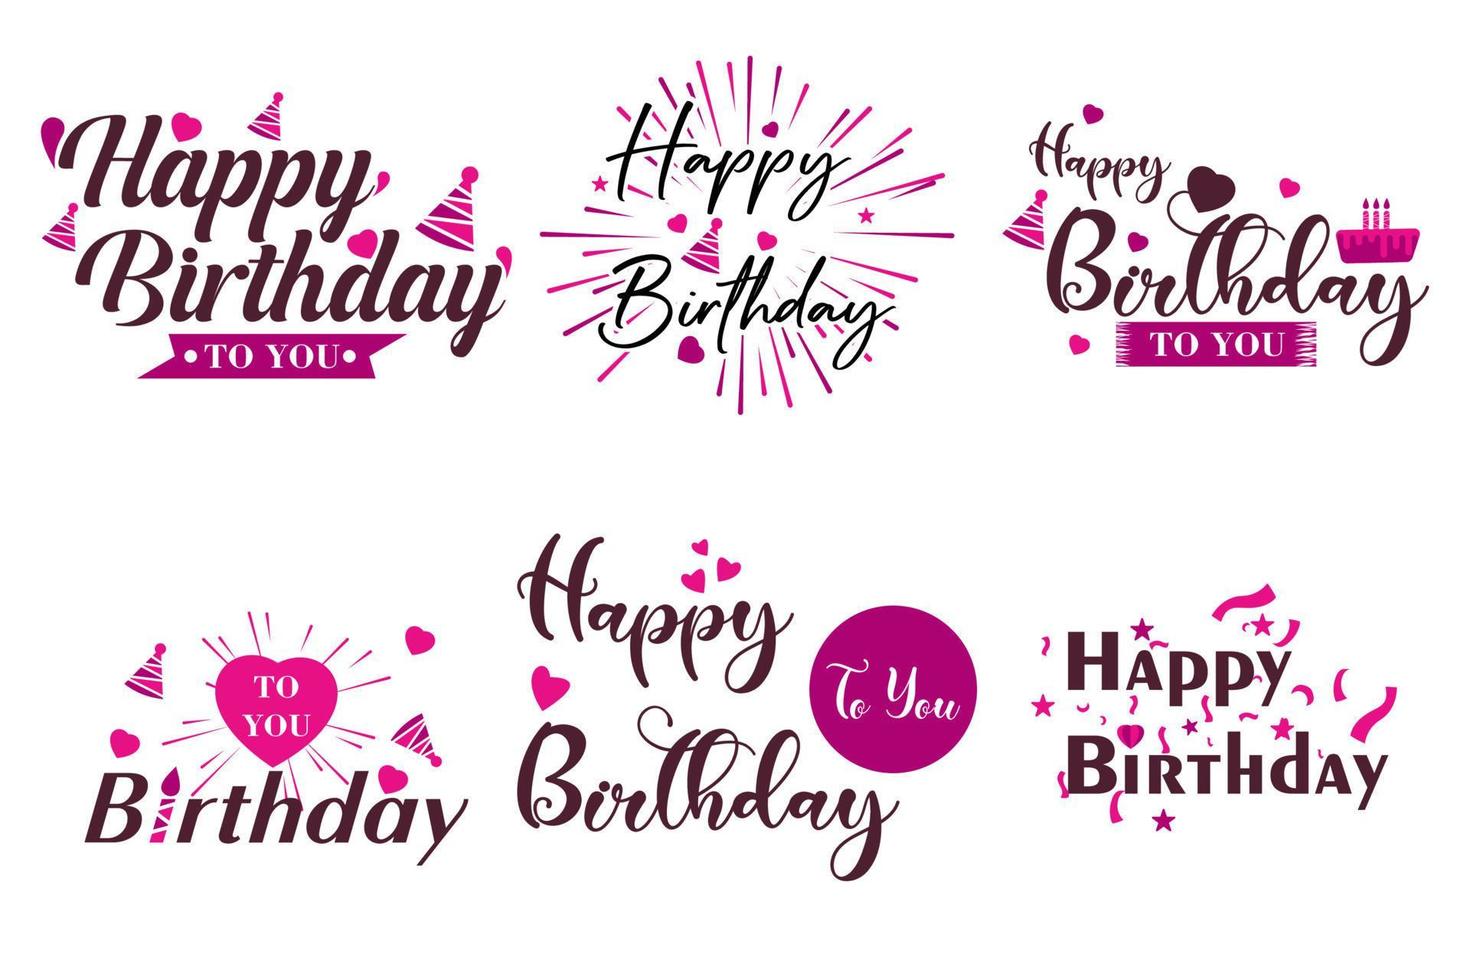 collection of illustrations of happy birthday, anniversary, with elements of heart, candles, birthday hat on a white background vector